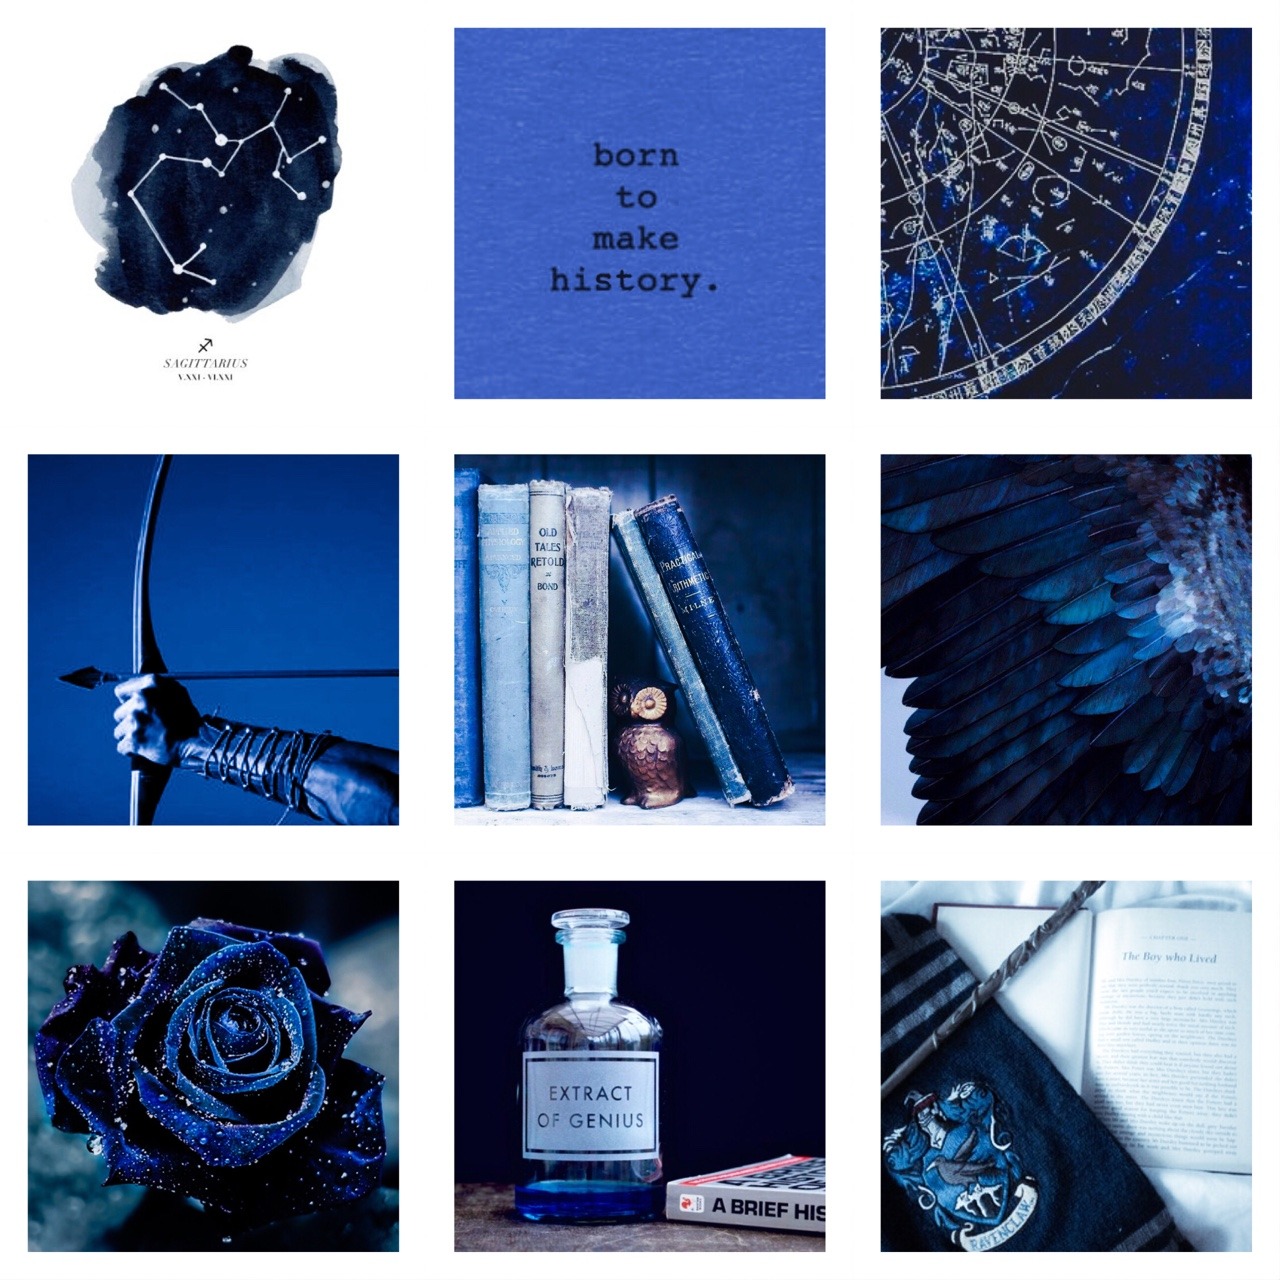 Can a Sagittarius be a Ravenclaw?